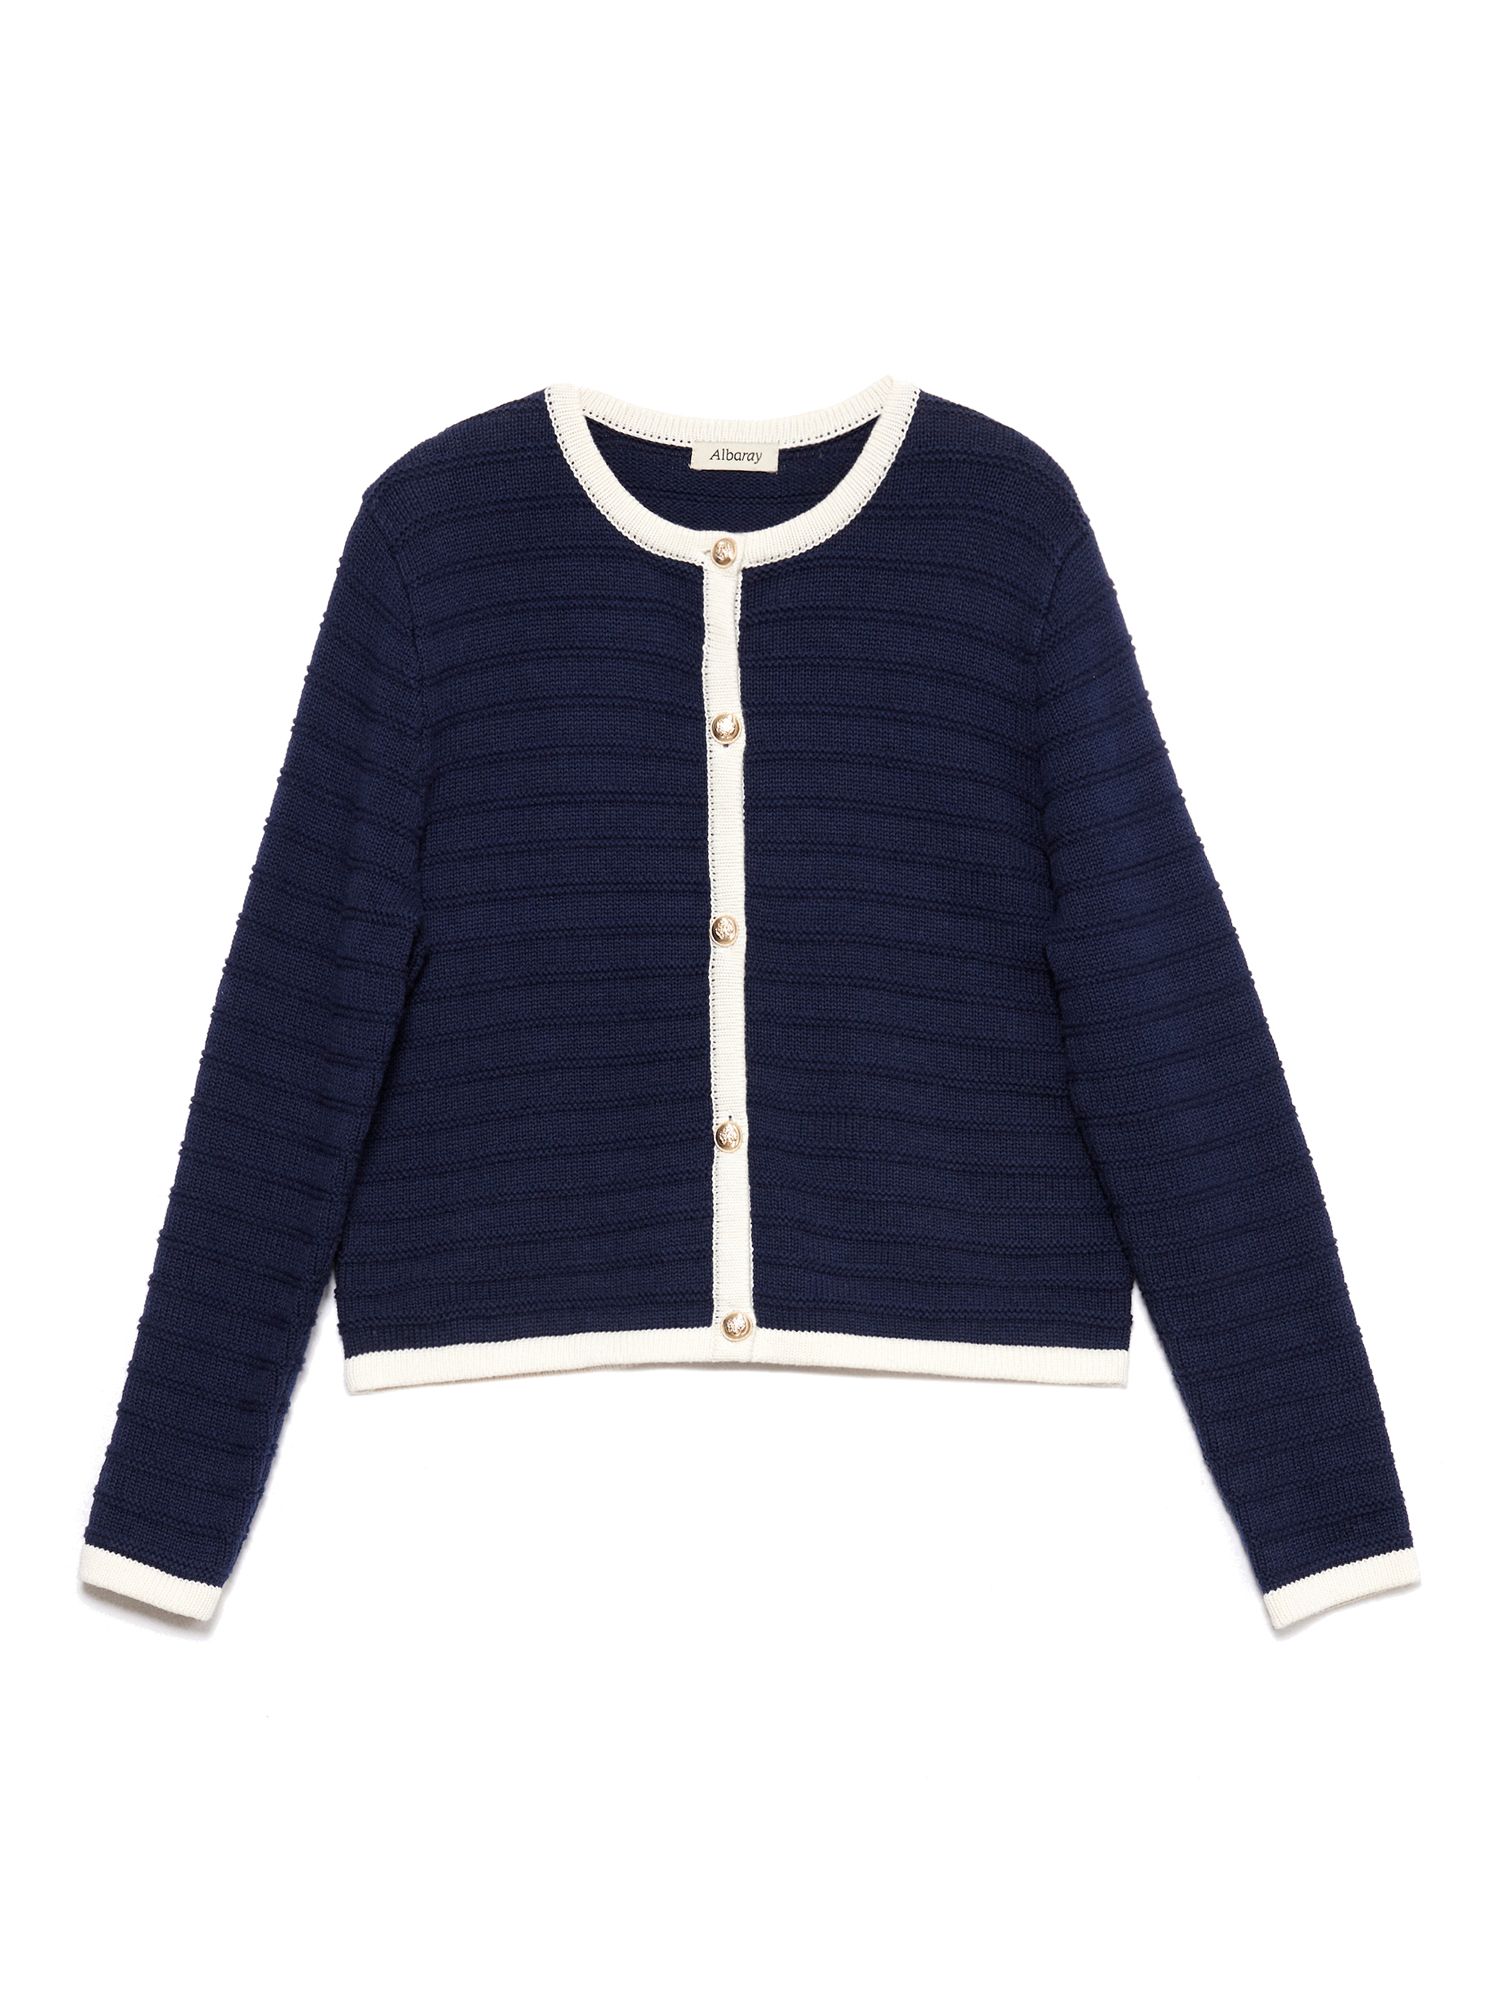 Buy Albaray Knitted Contrast Trim Cardigan/Jacket, Navy Online at johnlewis.com